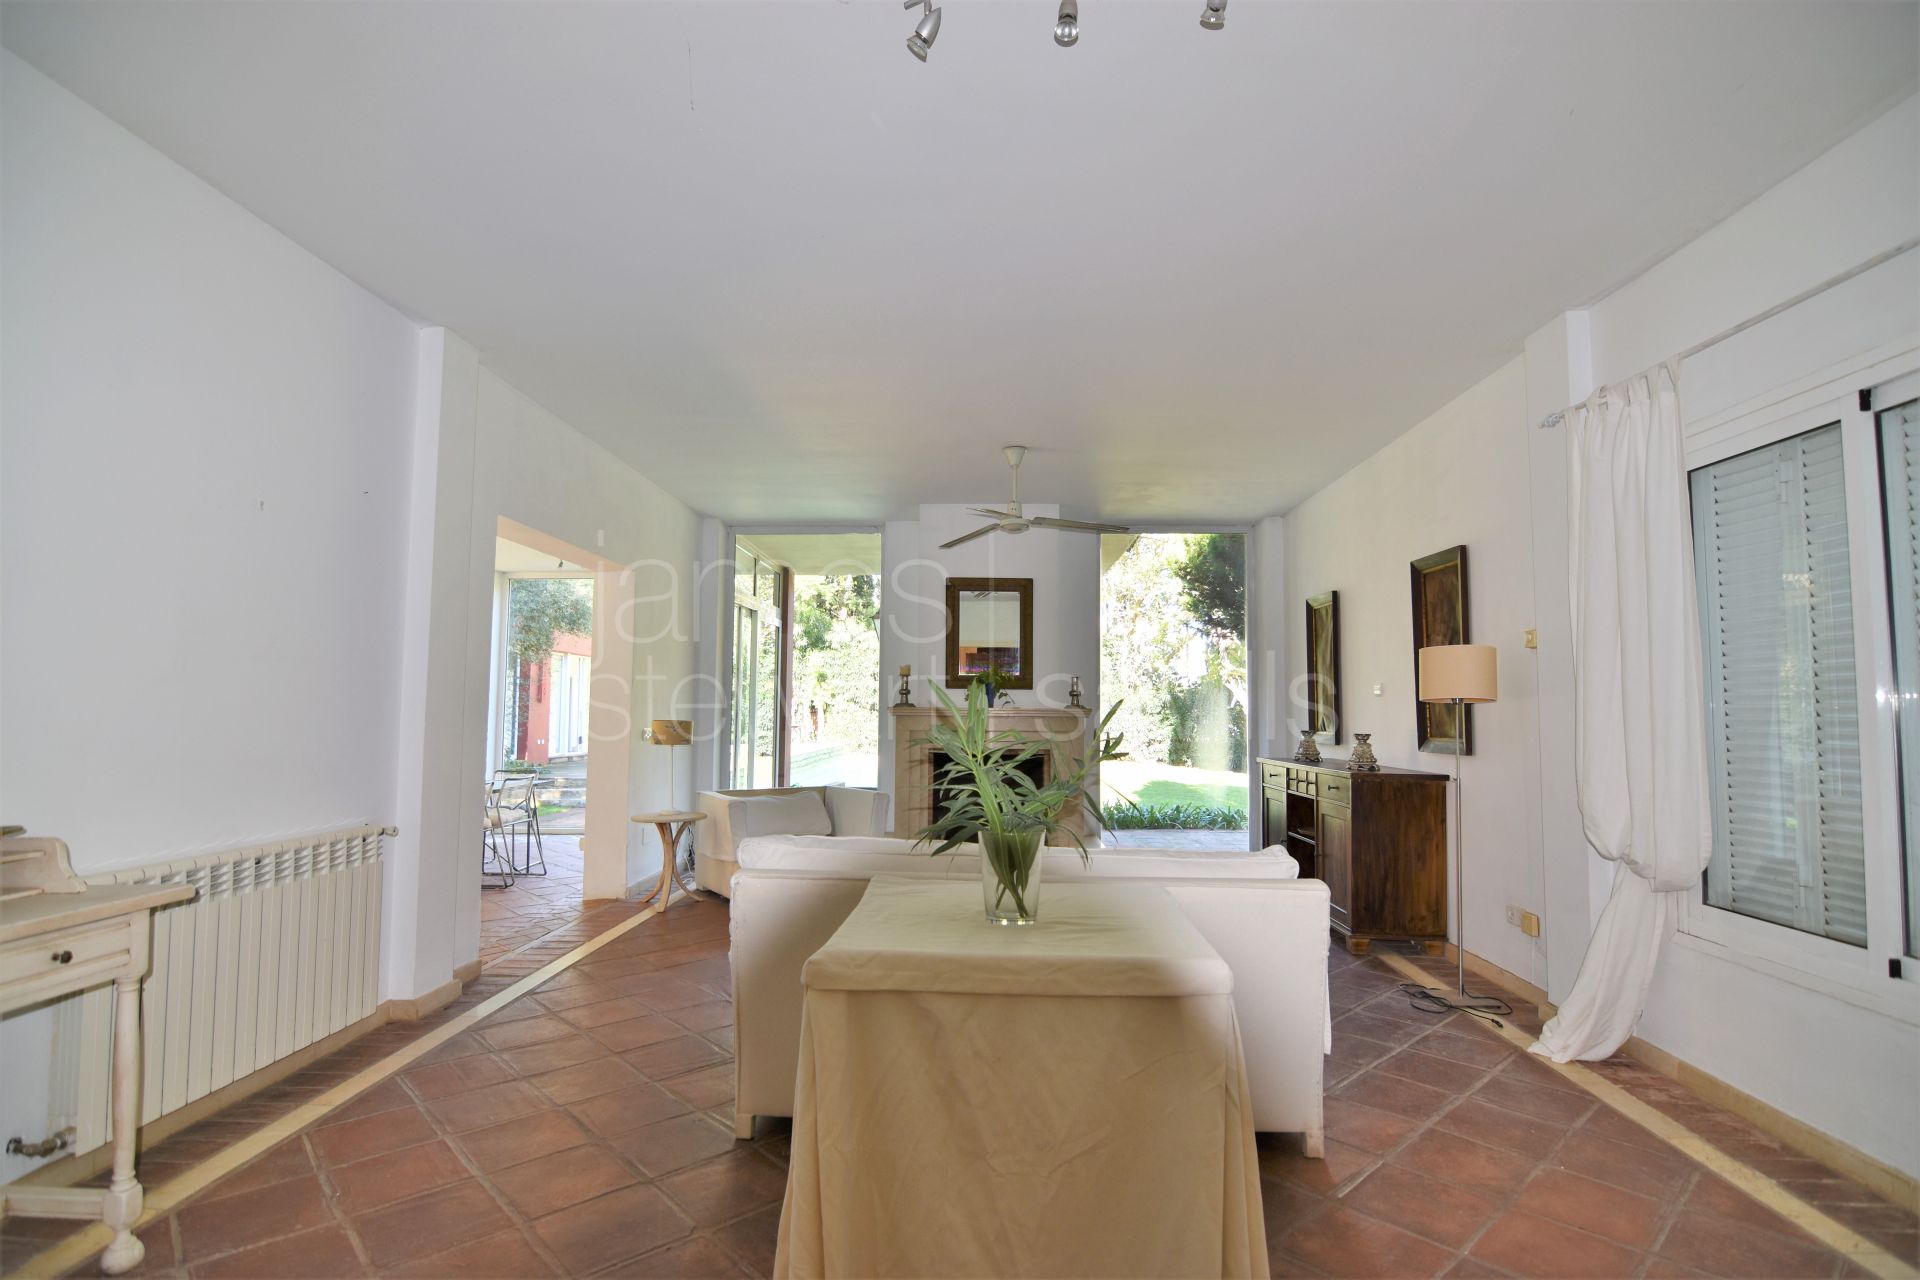 Single storey villa with guest house discreetly located in the Kings & Queens of Sotogrande